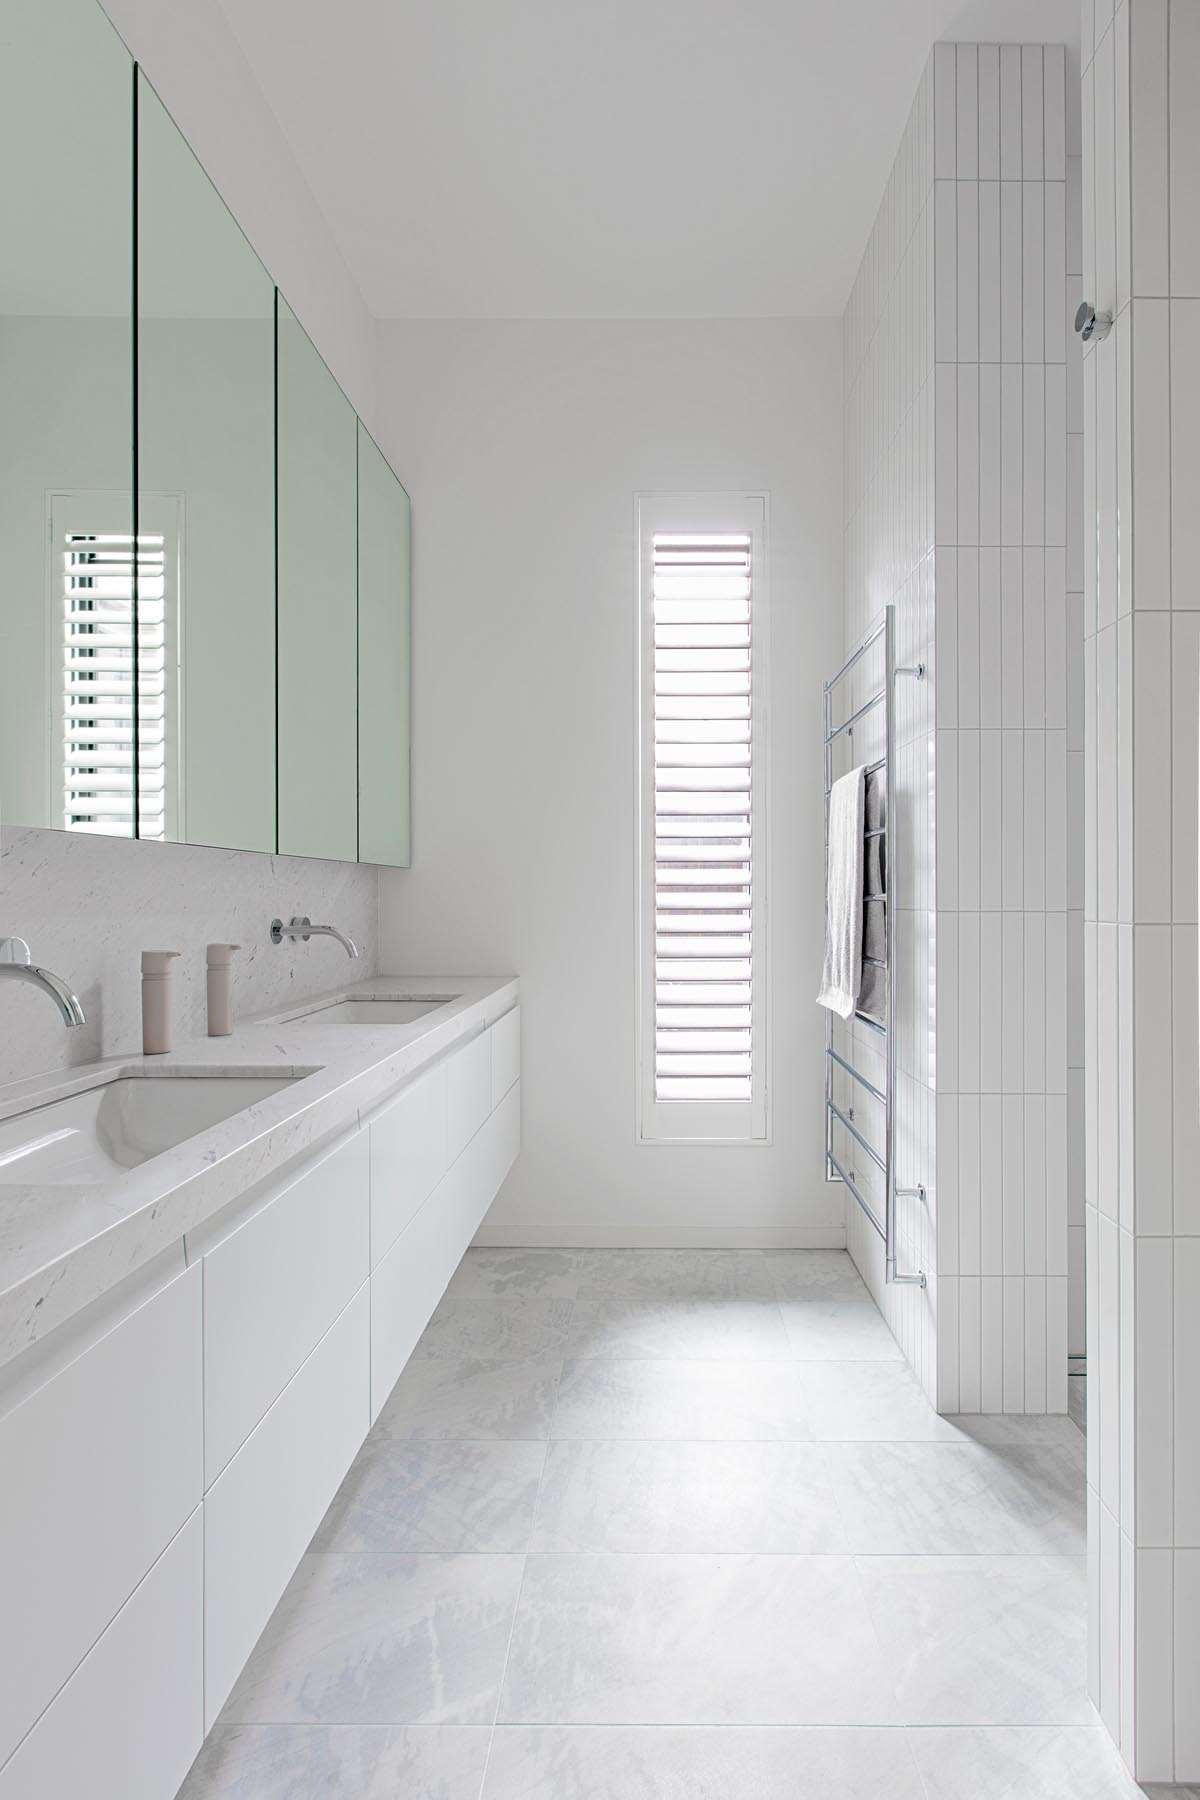 In this modern all white bathroom, honed Carrara Bianco marble was used for both the vanity countertop and the flooring.